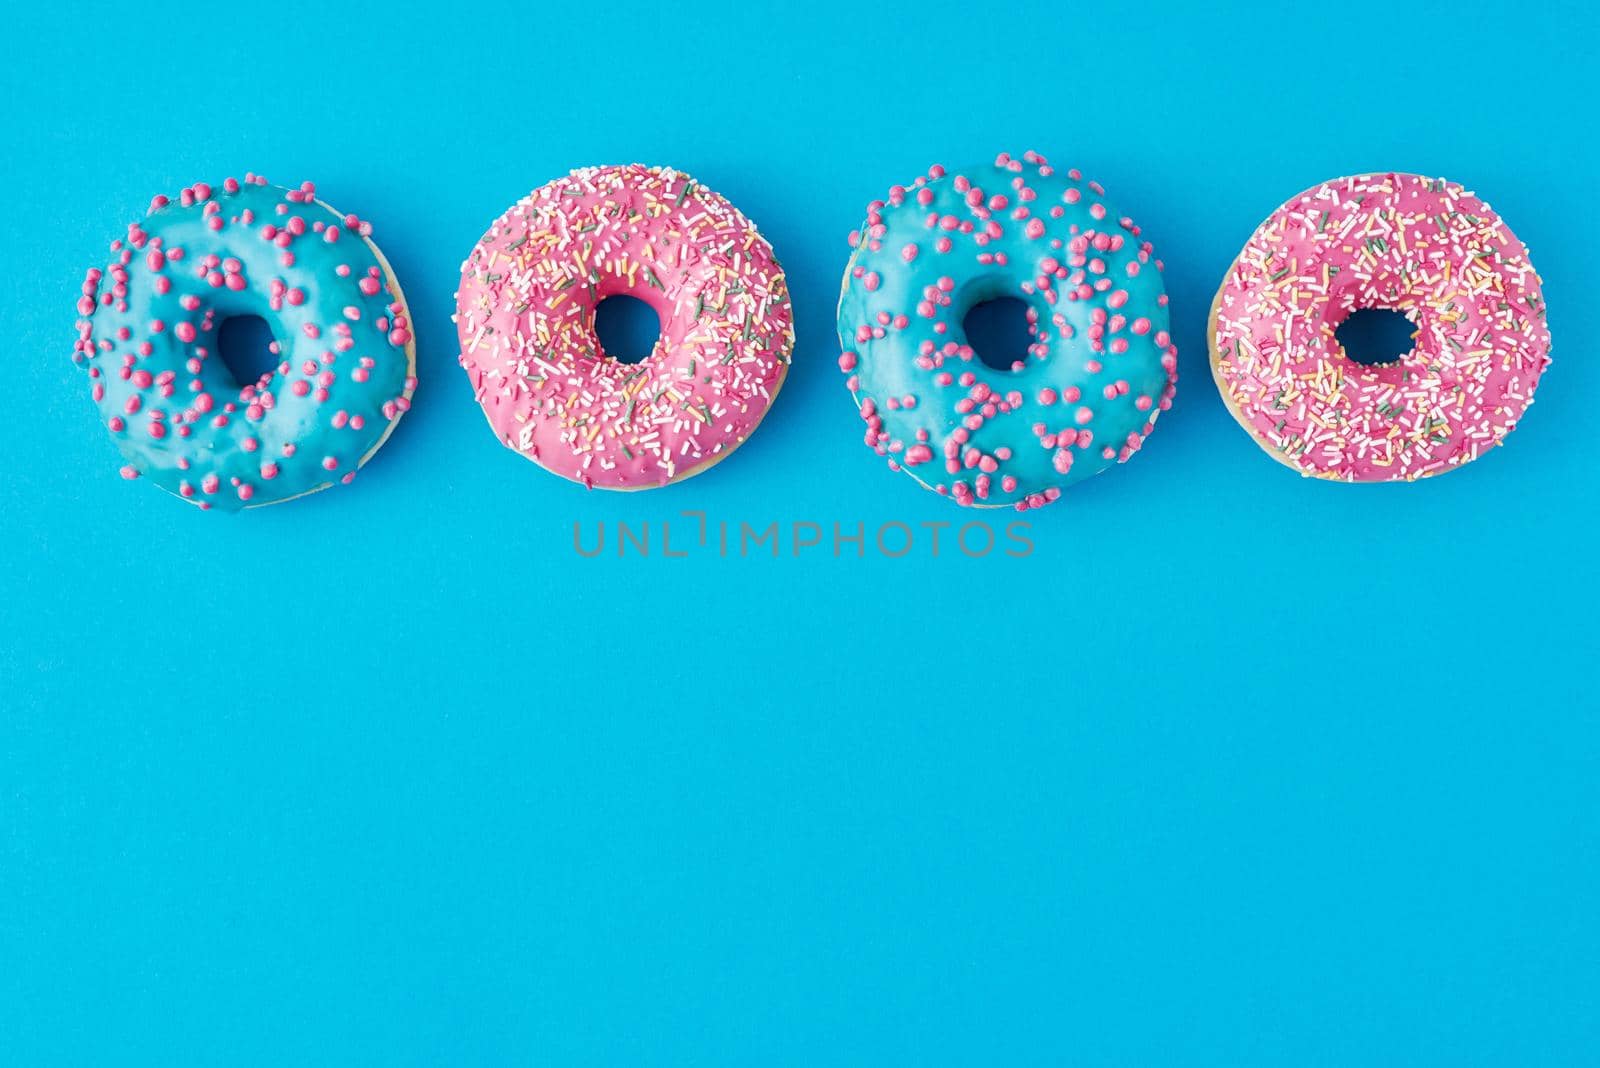 Different types of a colorful donats decorated sprinkles and icing on blue background by Lazy_Bear